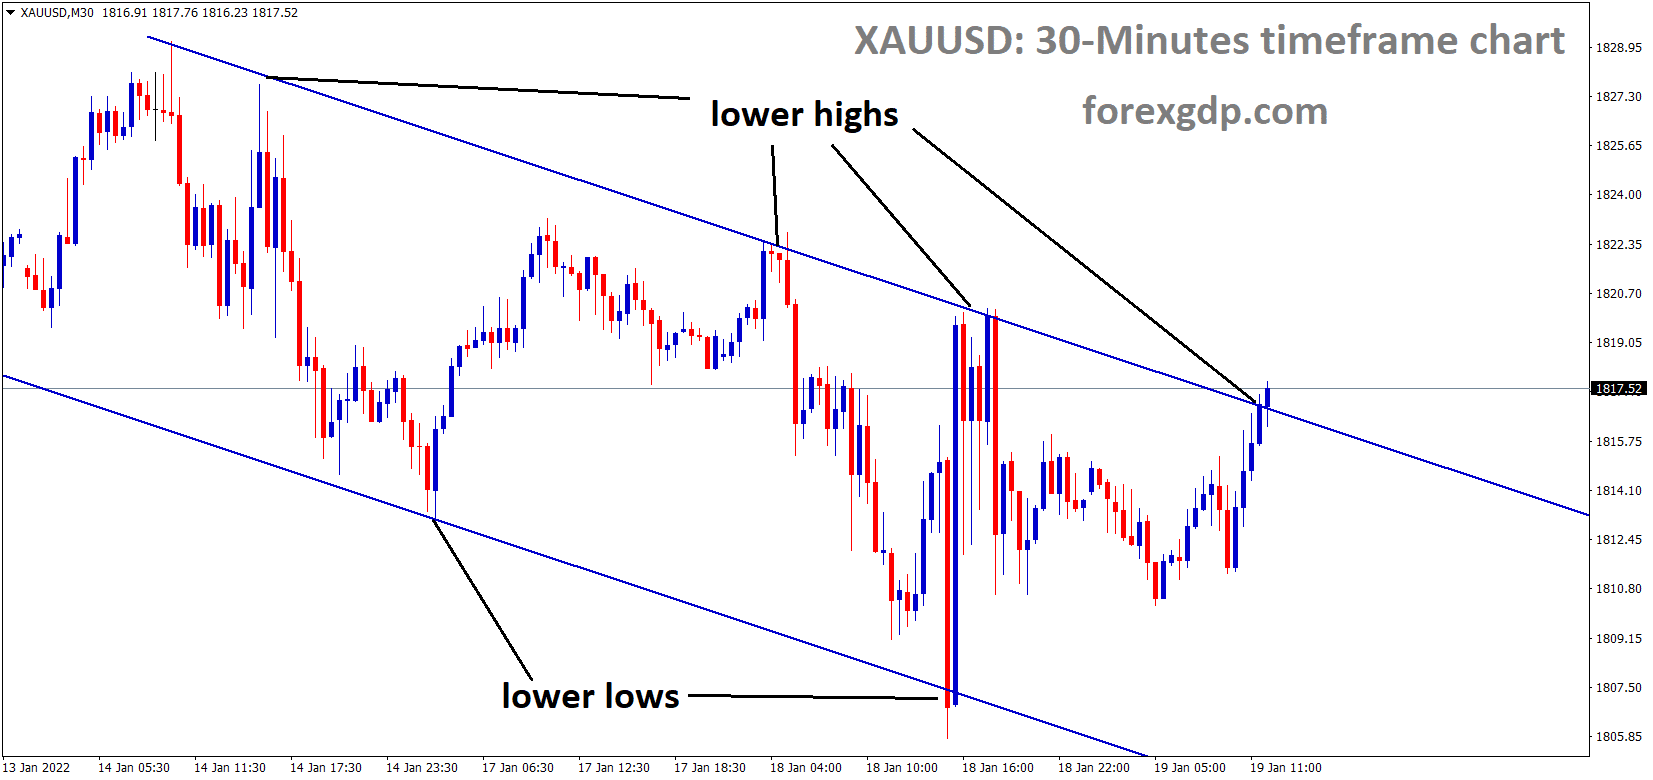 XAUUSD Gold price is moving in the Descending channel and the market has reached the lower high area of the Descending channel